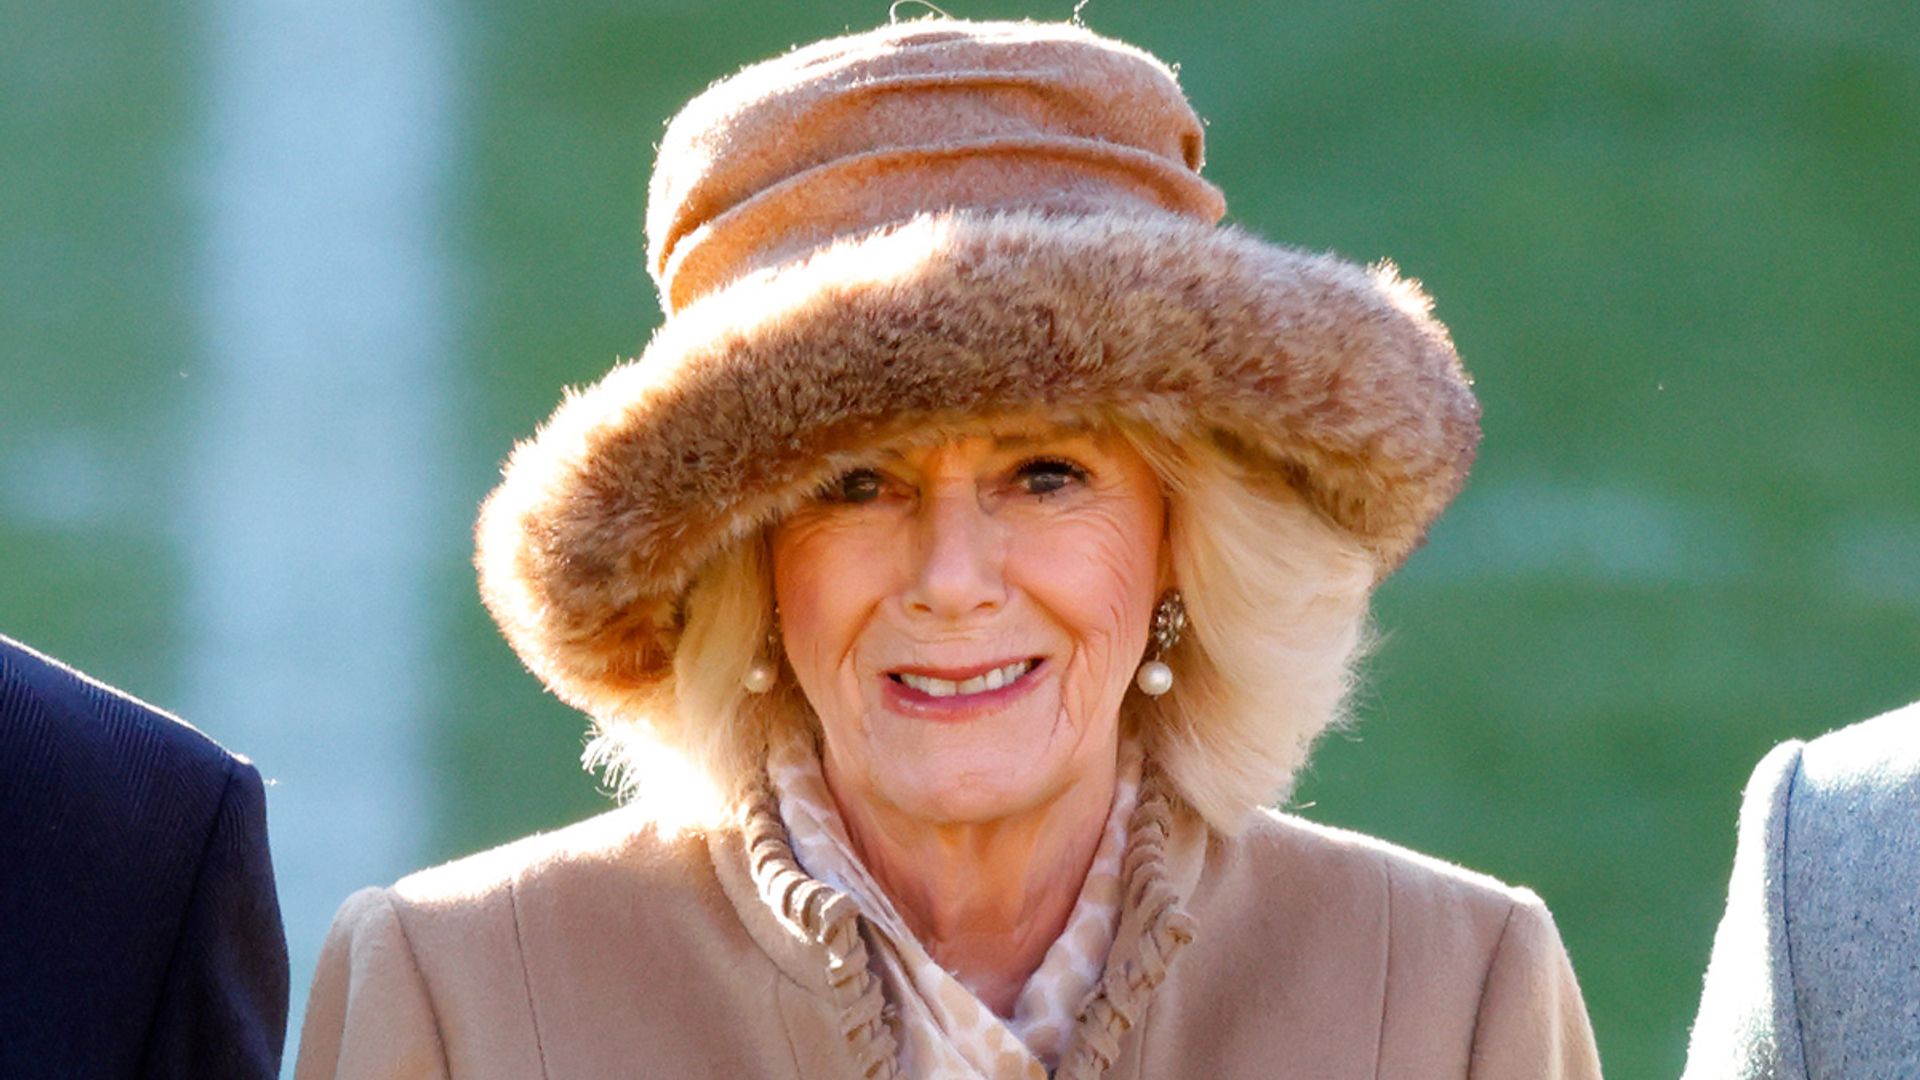 This Old Thing? Queen Camilla Just Recycled Her Outfit From Harry